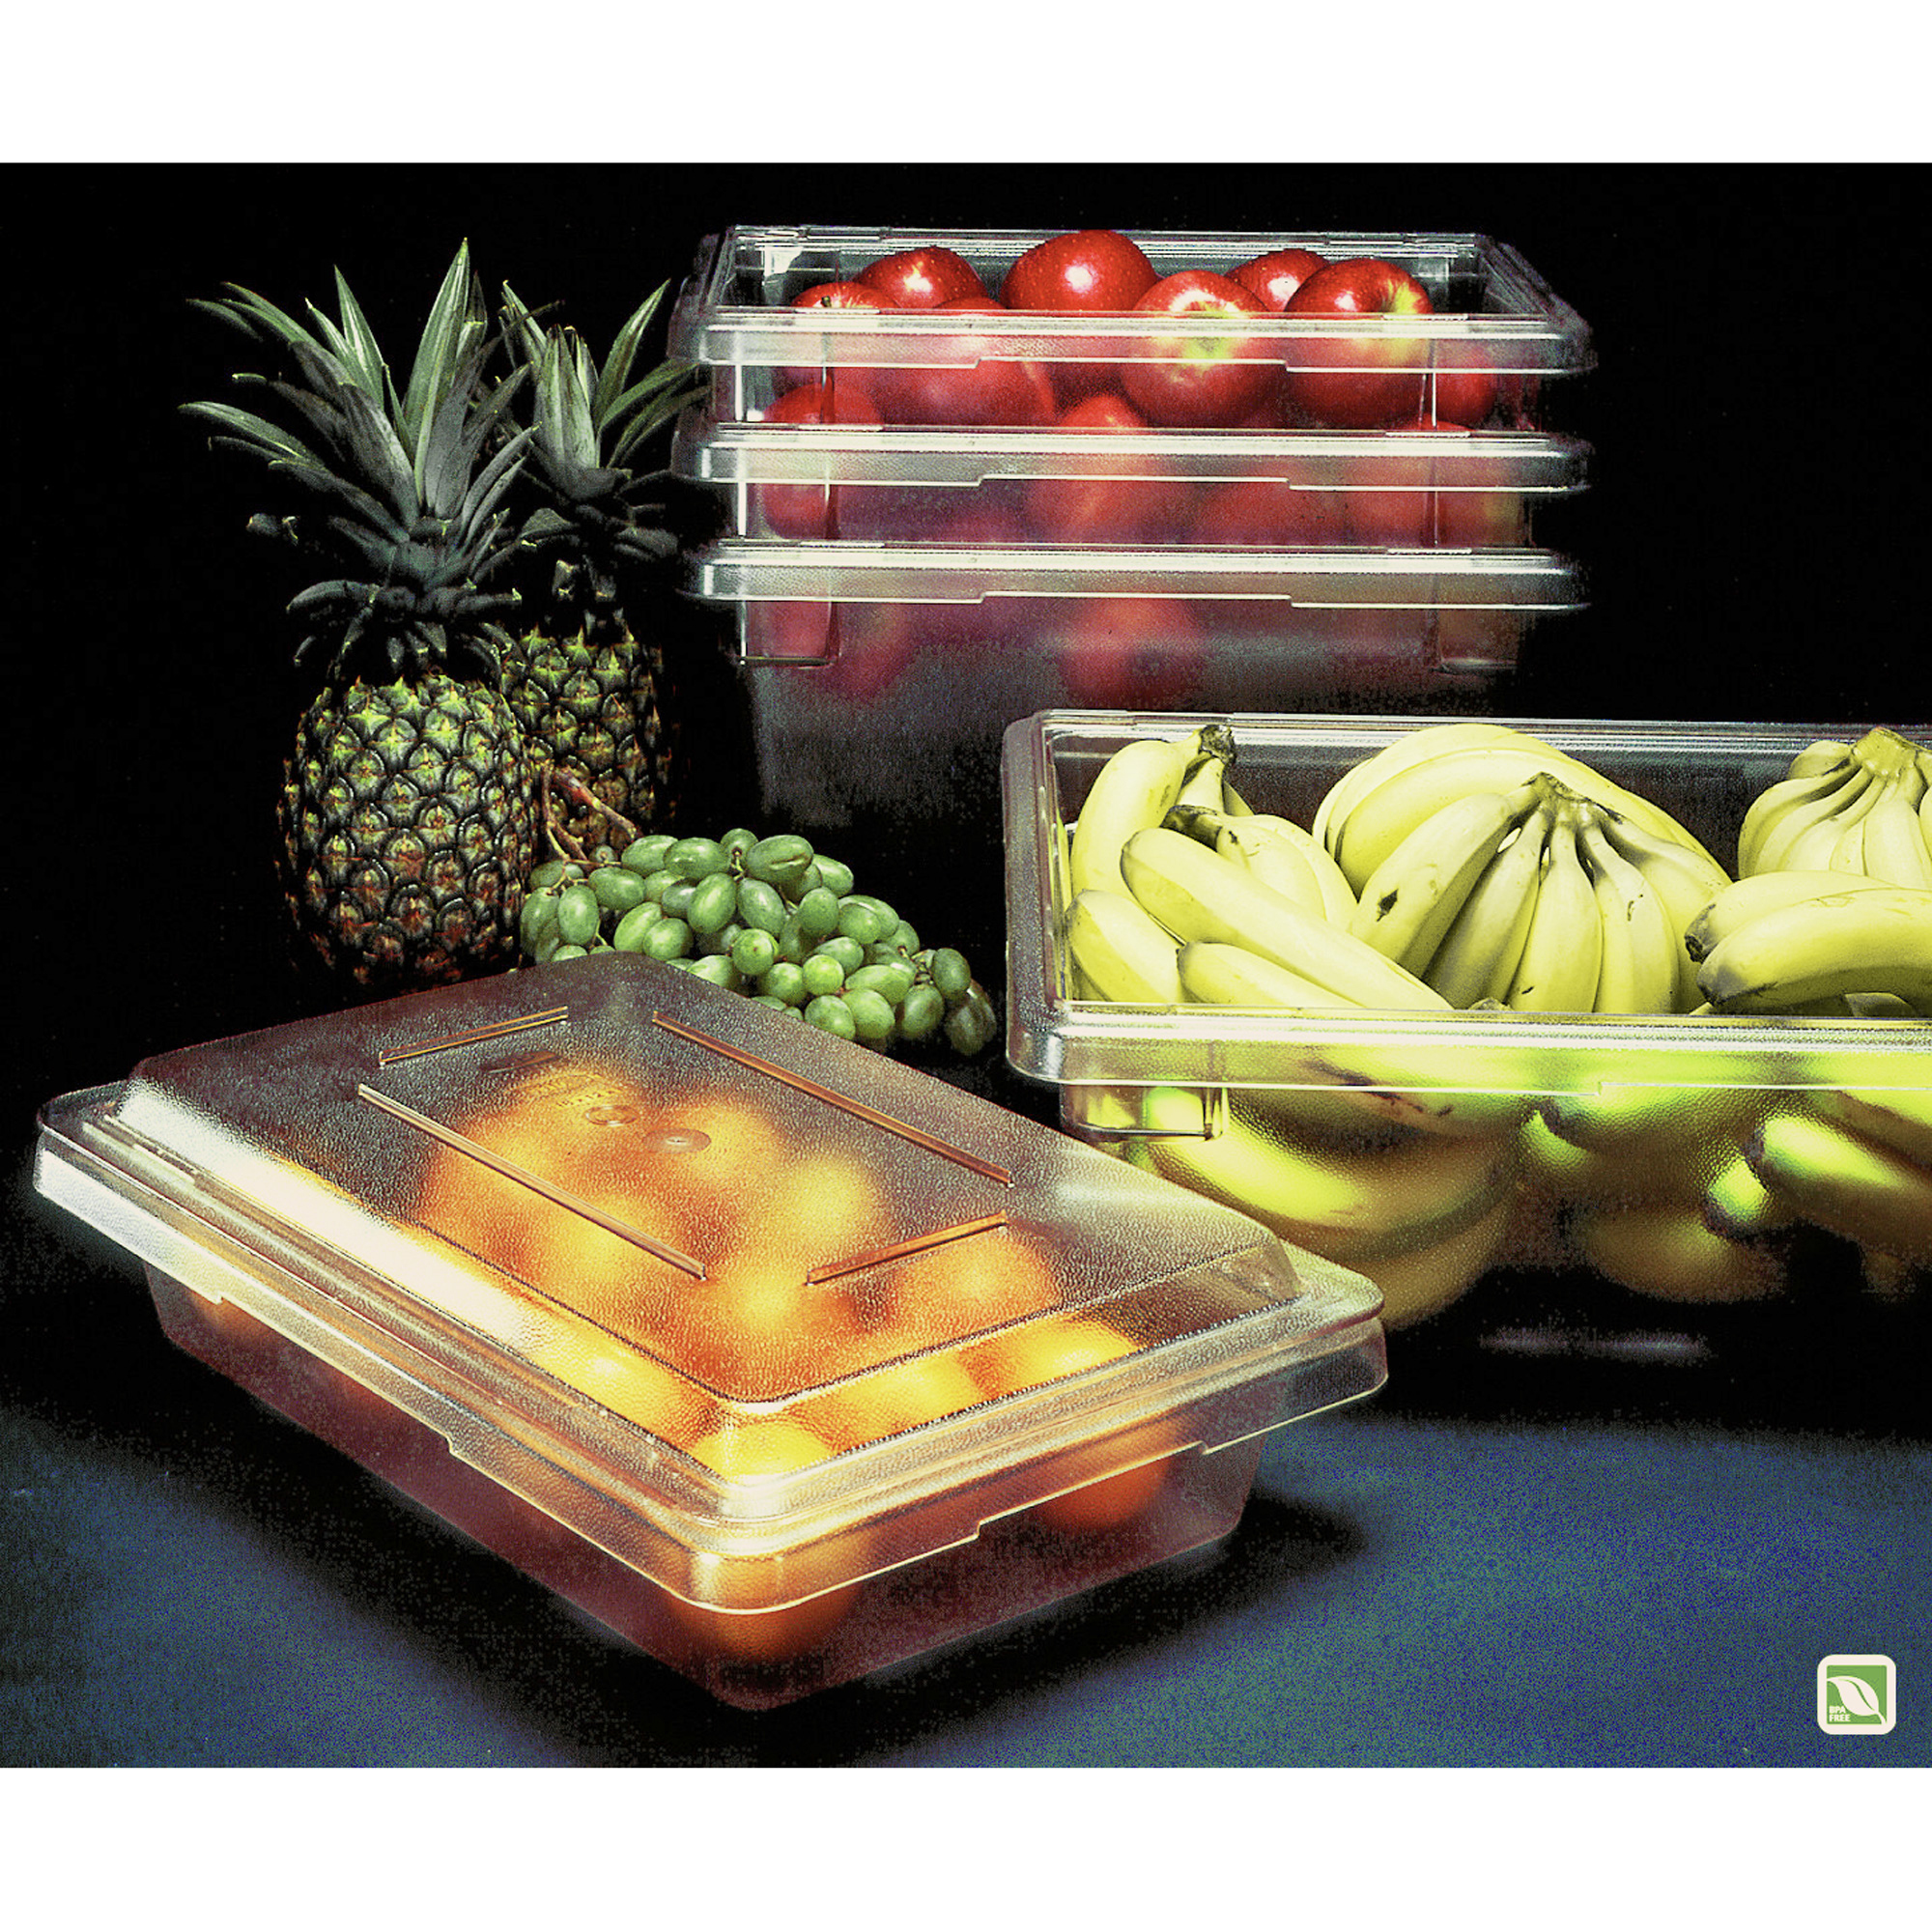 Rubbermaid Commercial 3.5-Gallon Food/Tote Box - External Dimensions: 18  Length x 12 Width x 6 Height - 3.50 gal - Snap Lock Closure - Stackable -  Clear - For Food Storage 